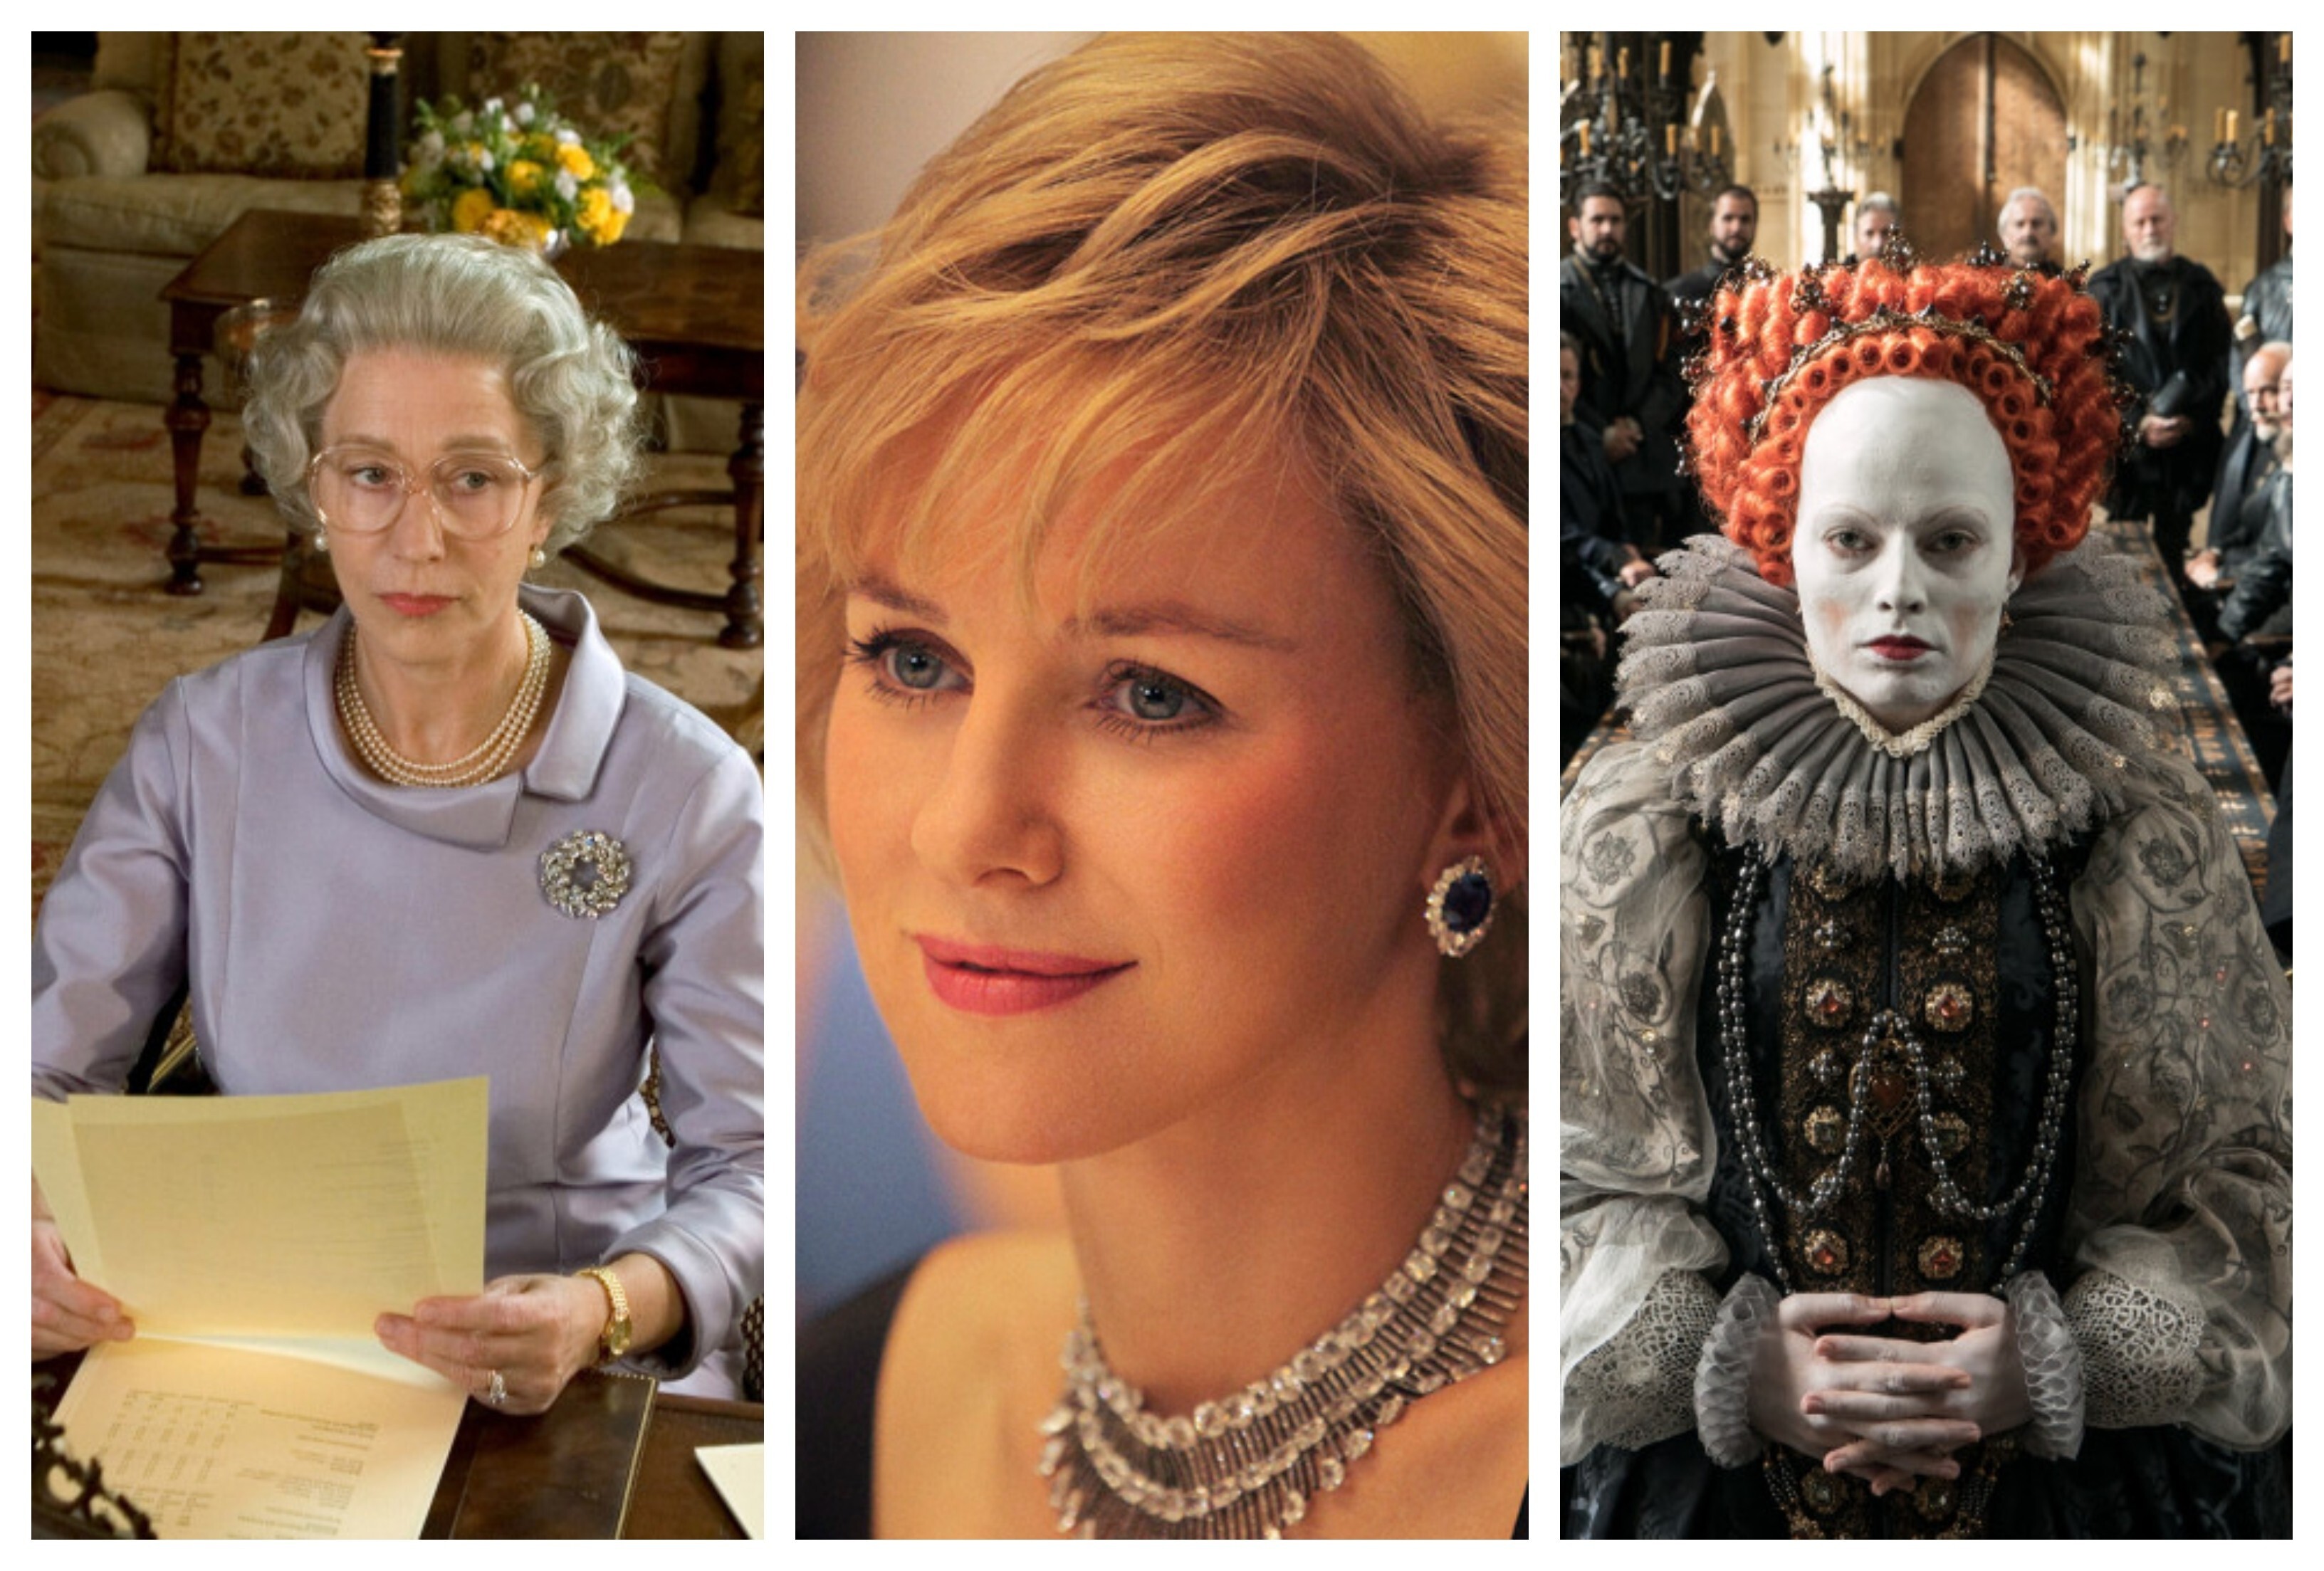 Finished The Crown? Why not binge on more British royal family drama such as, from left, The Queen, Diana or Mary Queen of Scots? Photos: Bang Showbiz